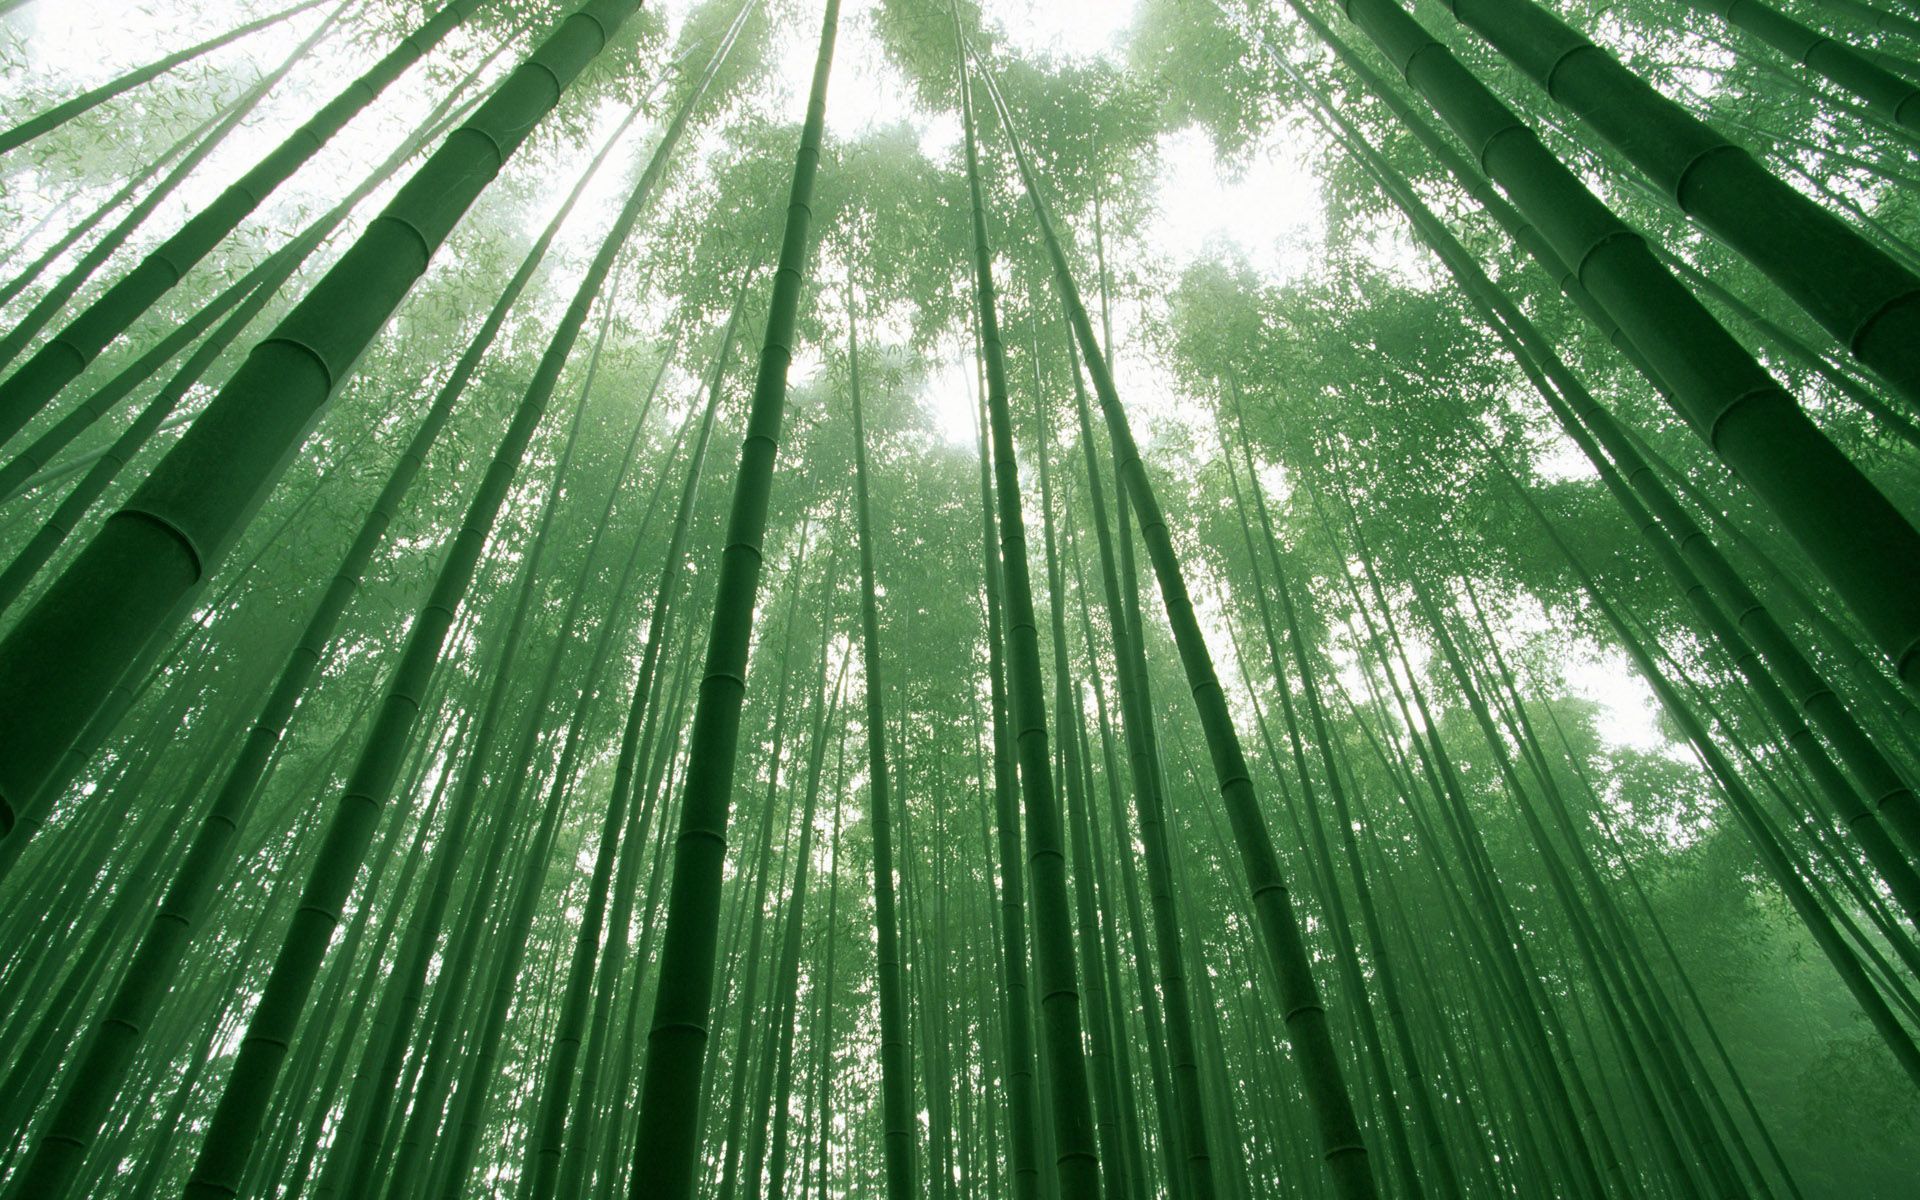 Download wallpaper 1366x768 bamboo forest trees nature tablet laptop  1366x768 hd background 2433